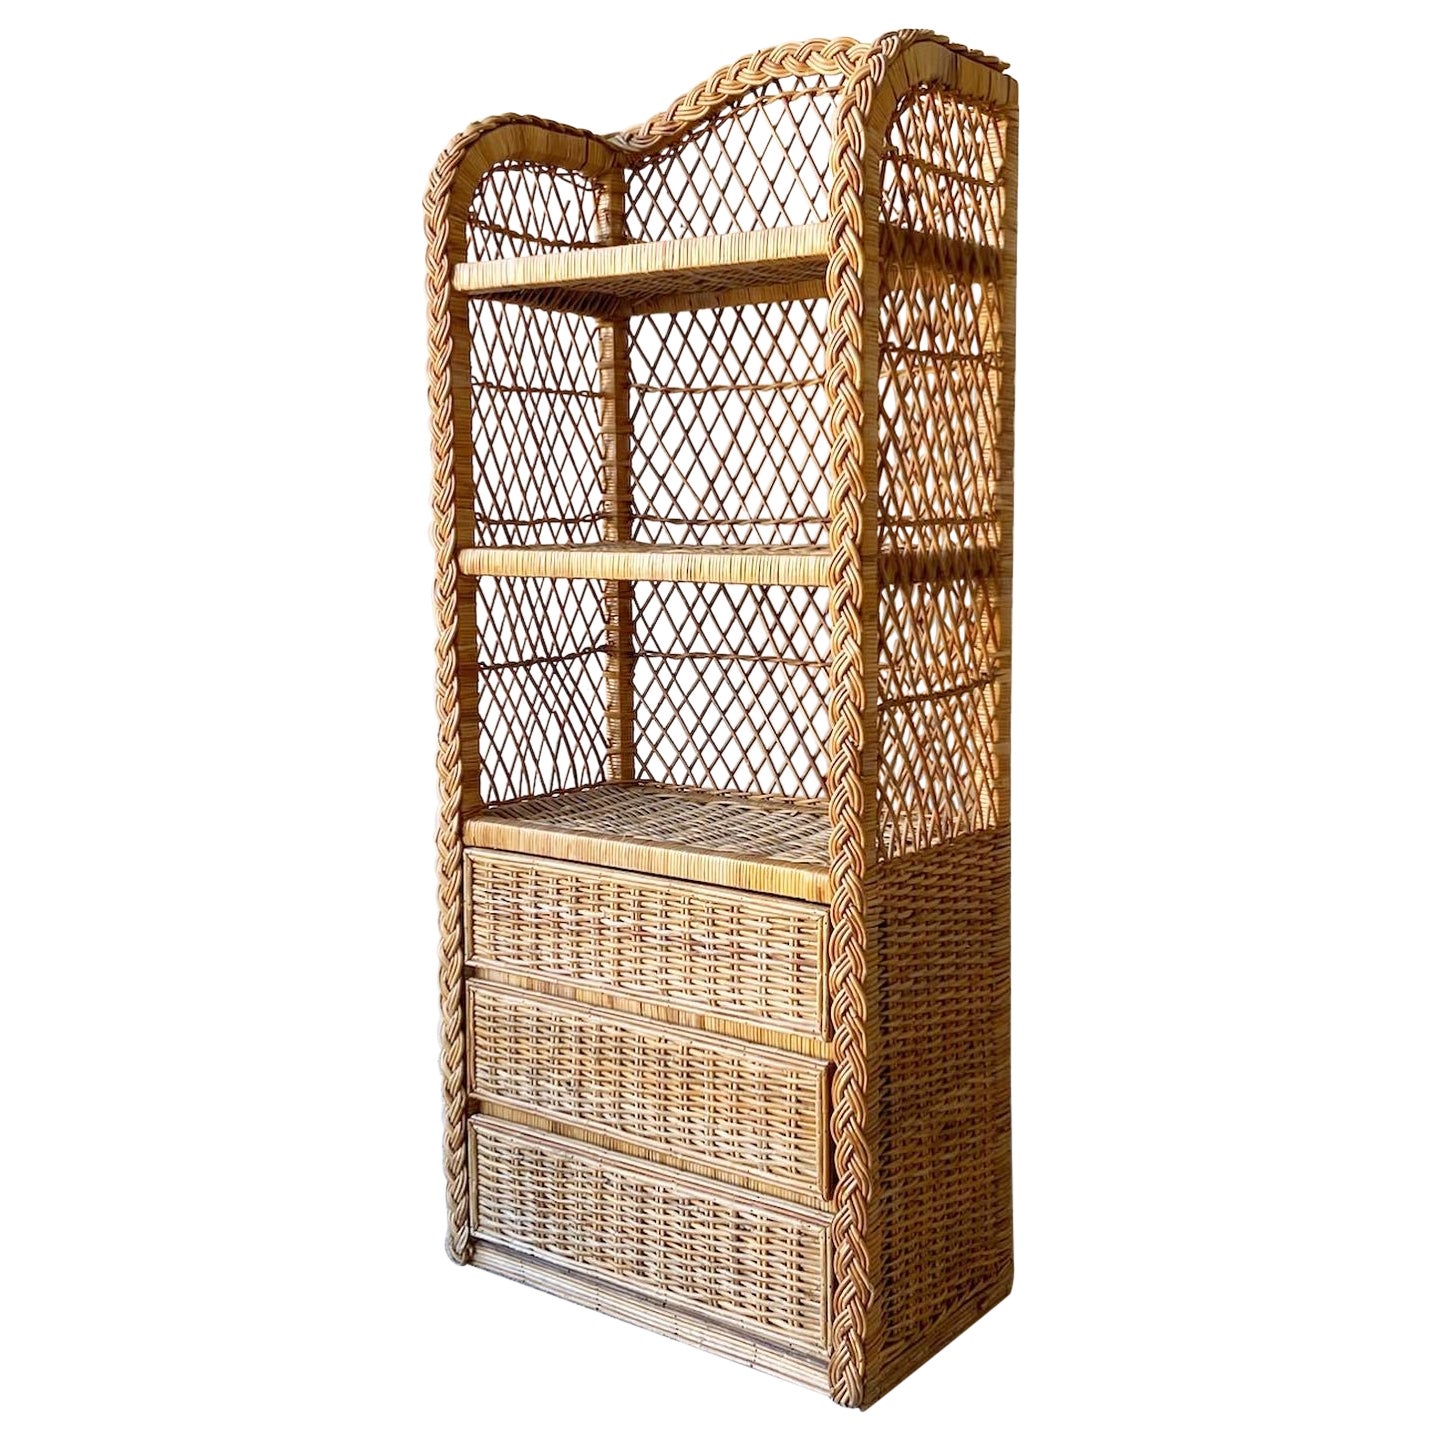 Vintage Boho Chic Woven Wicker Etagere For Sale